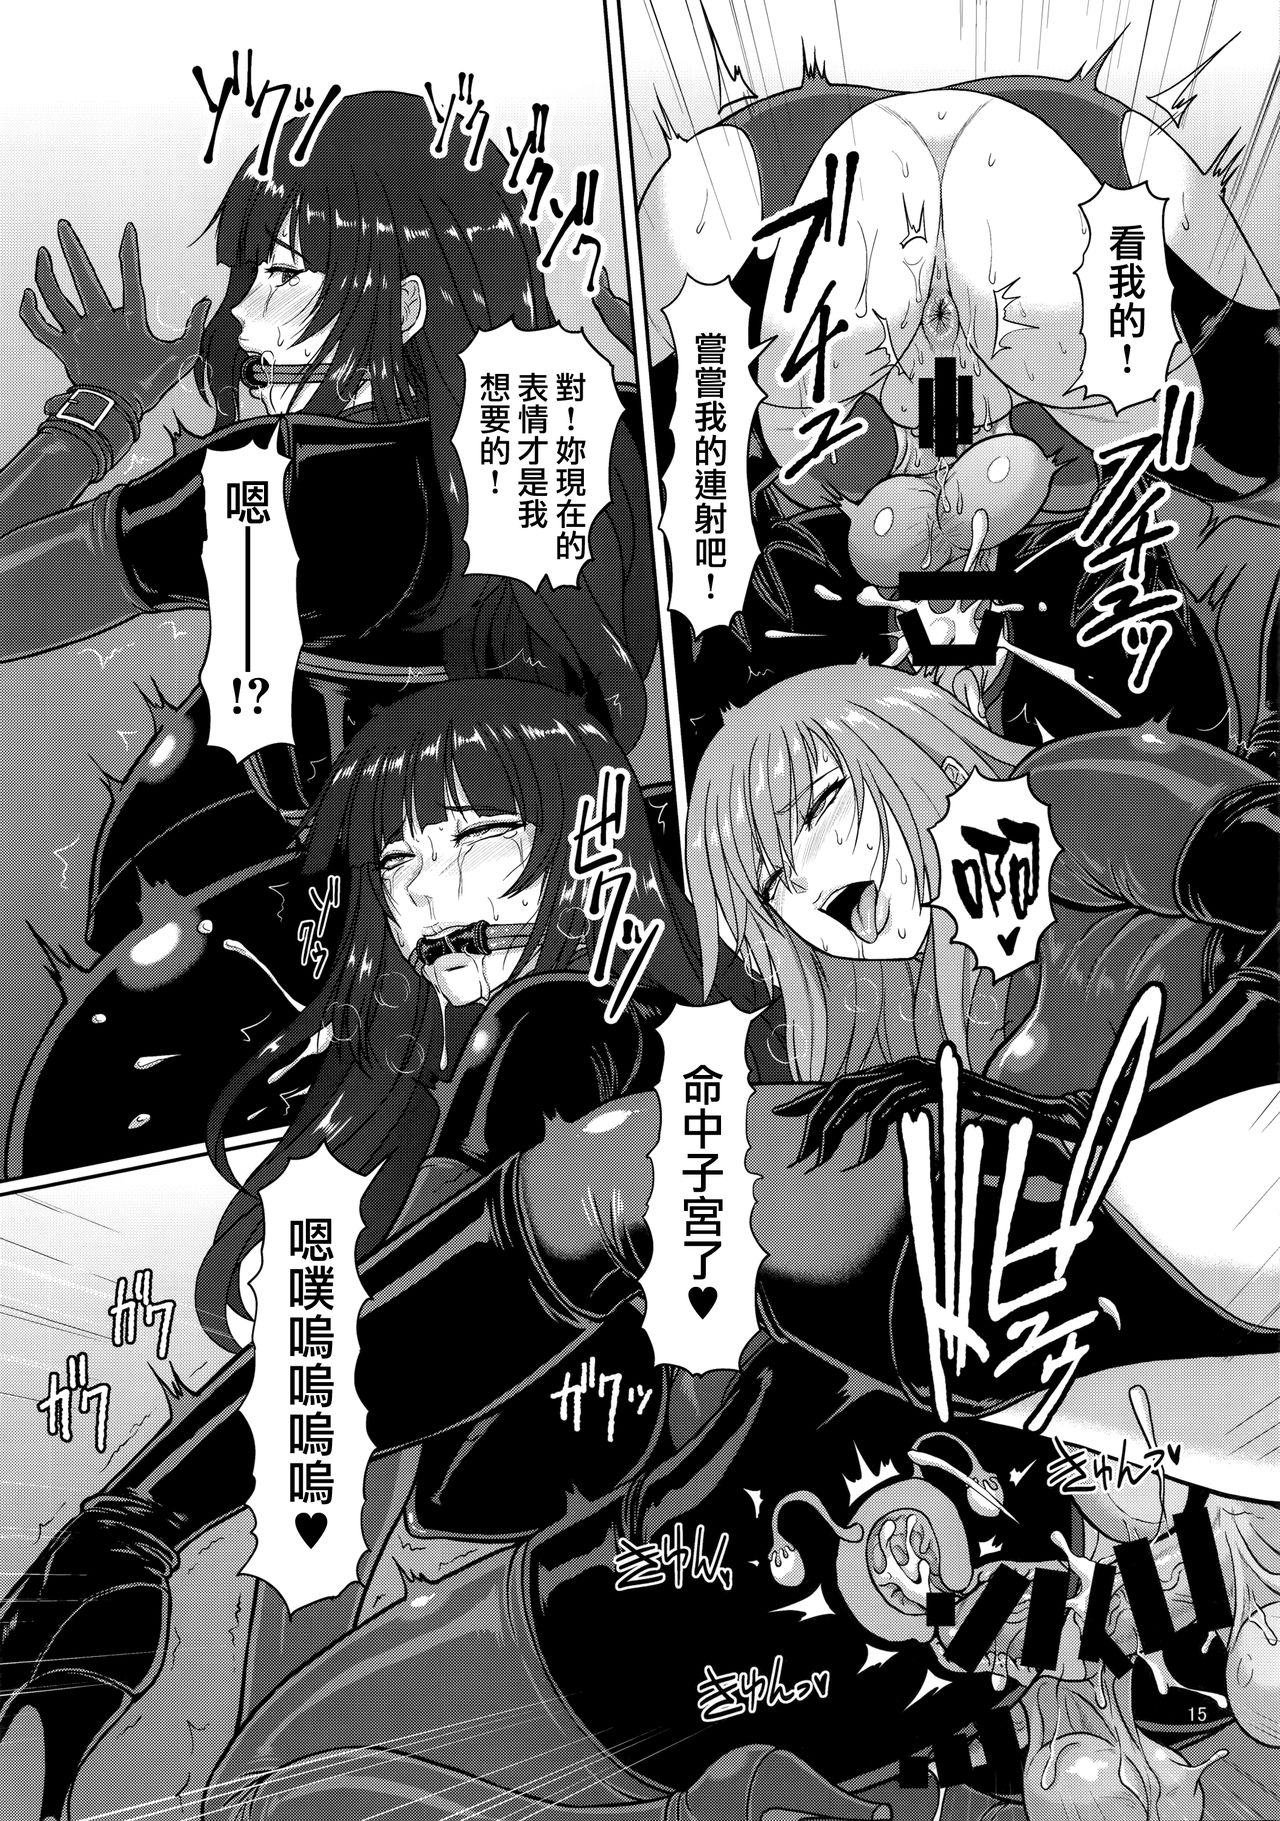 (C92) [SERIOUS GRAPHICS (ICE)] ICE BOXXX 21 ACT OF DARKNESS (Girls und Panzer) [Chinese] [无毒汉化组扶毒分部] page 17 full